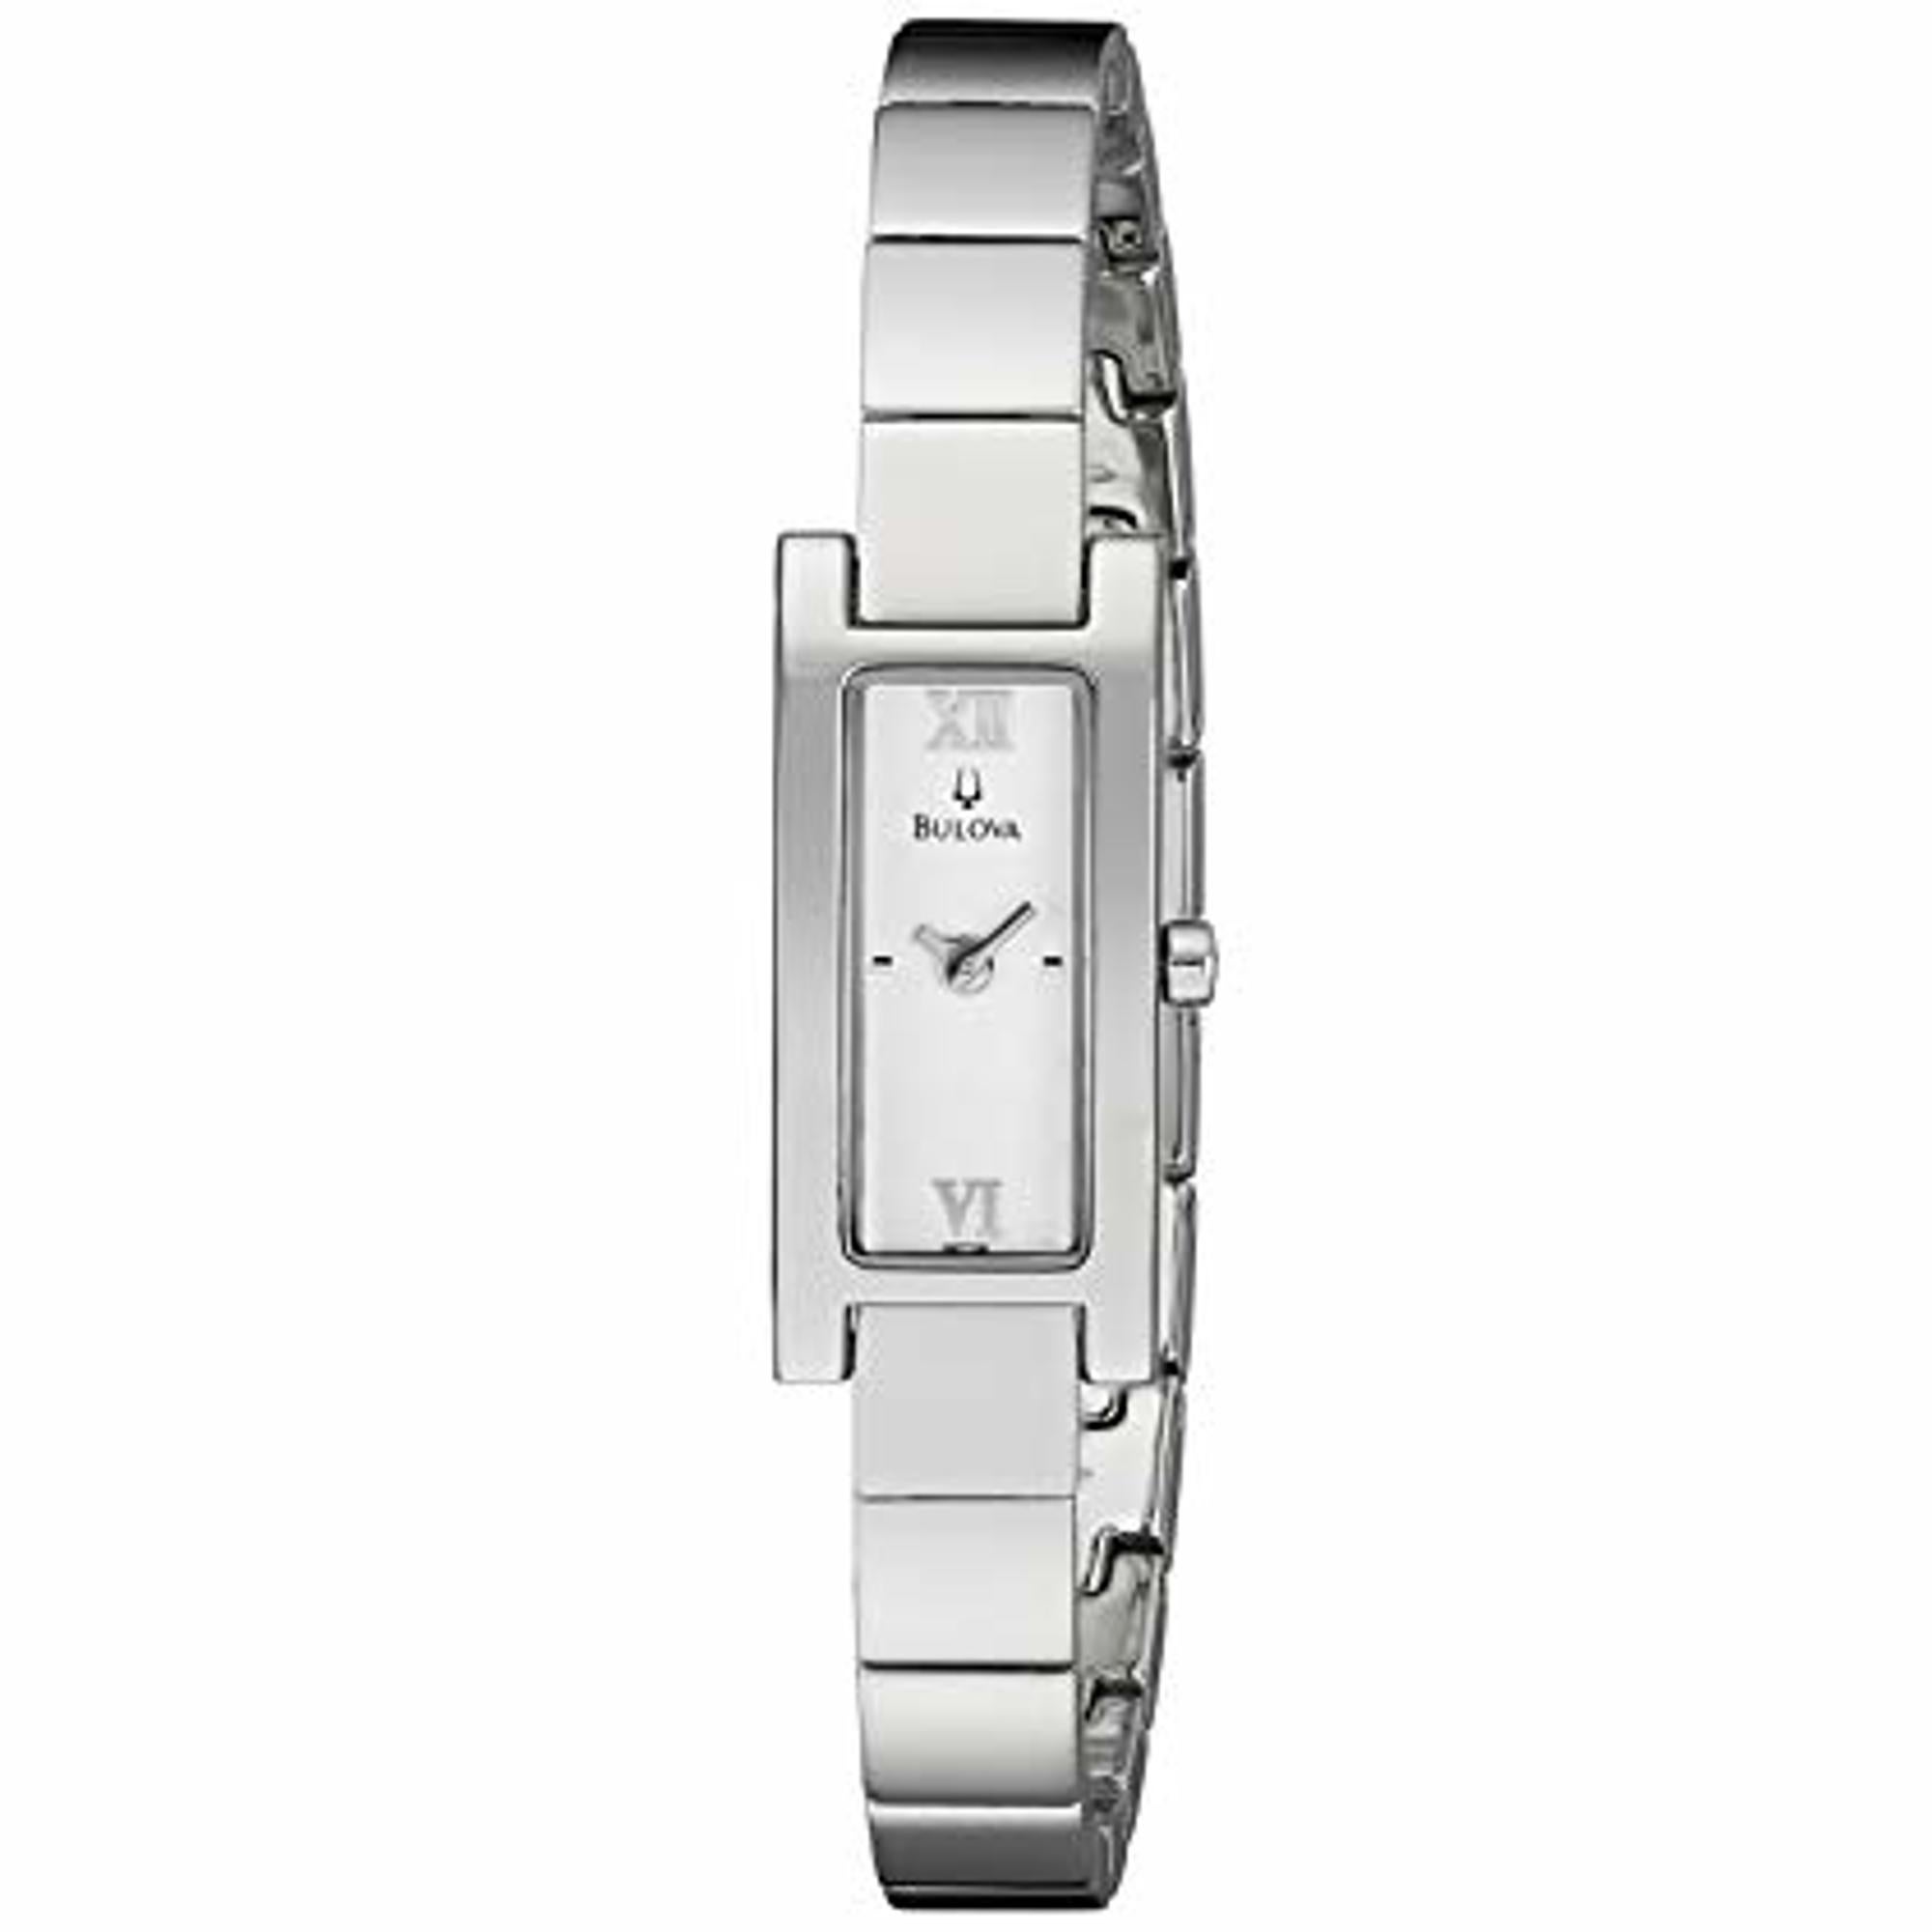 Pre Owned Bulova Steel Silver Roman Rectangle Dial Quartz Ladies Watch 96T08. The Watch Has Scratches and Discoloration. This Beautiful Timepiece is Powered by a Quartz (Battery) Movement and Features: a Silver-Tone Case and Bracelet, Fixed